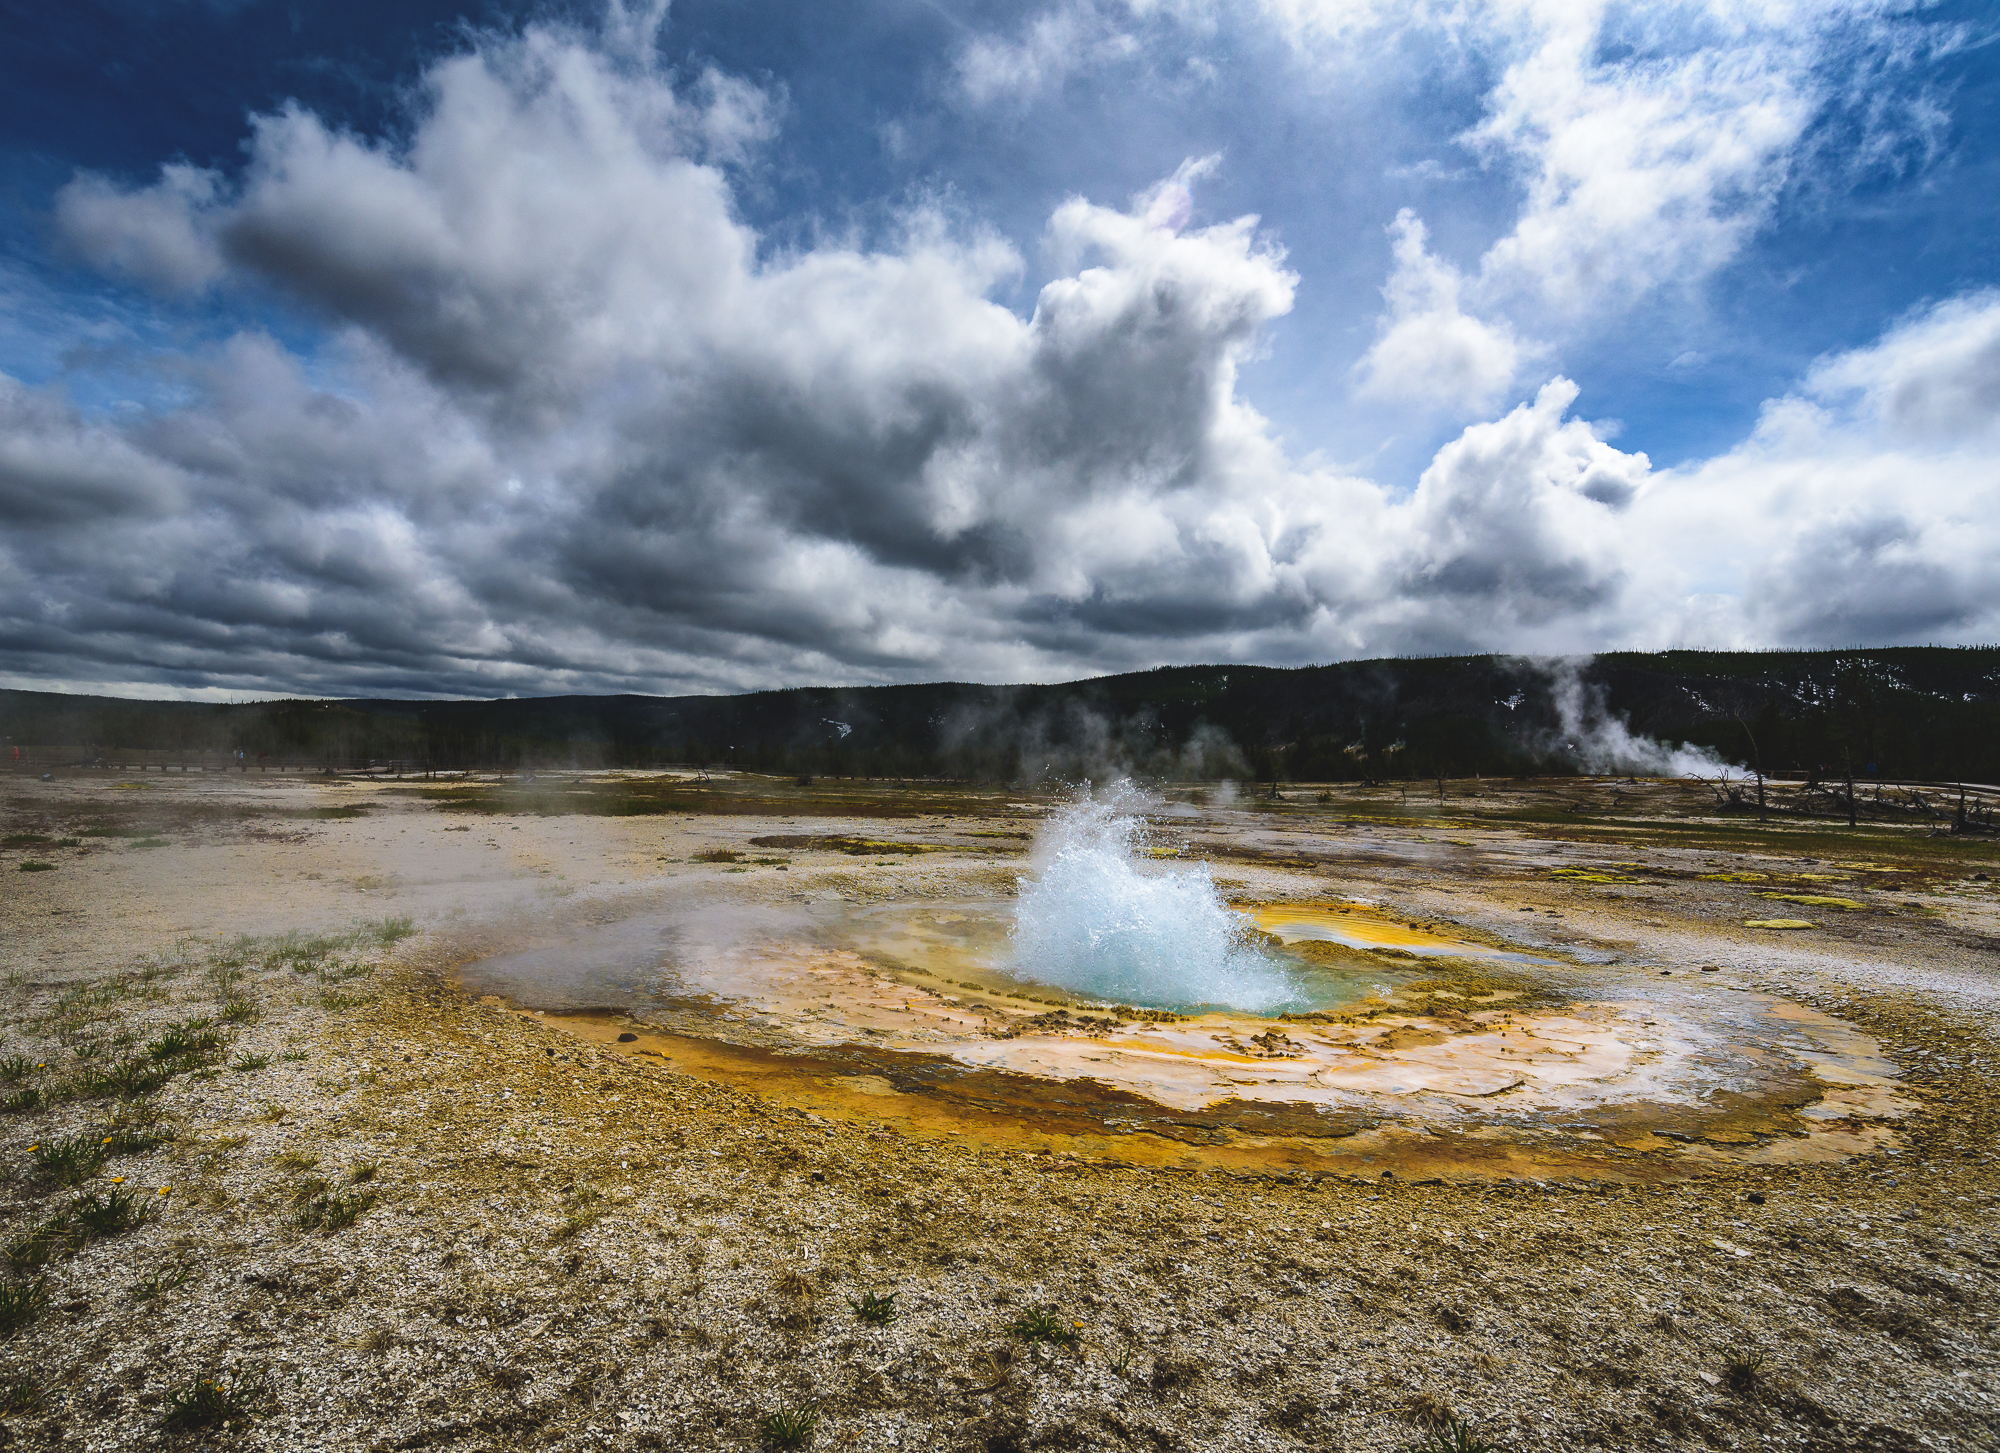 Supervolcano Eruption at Yellowstone: No, You Shouldn't Worry | Time